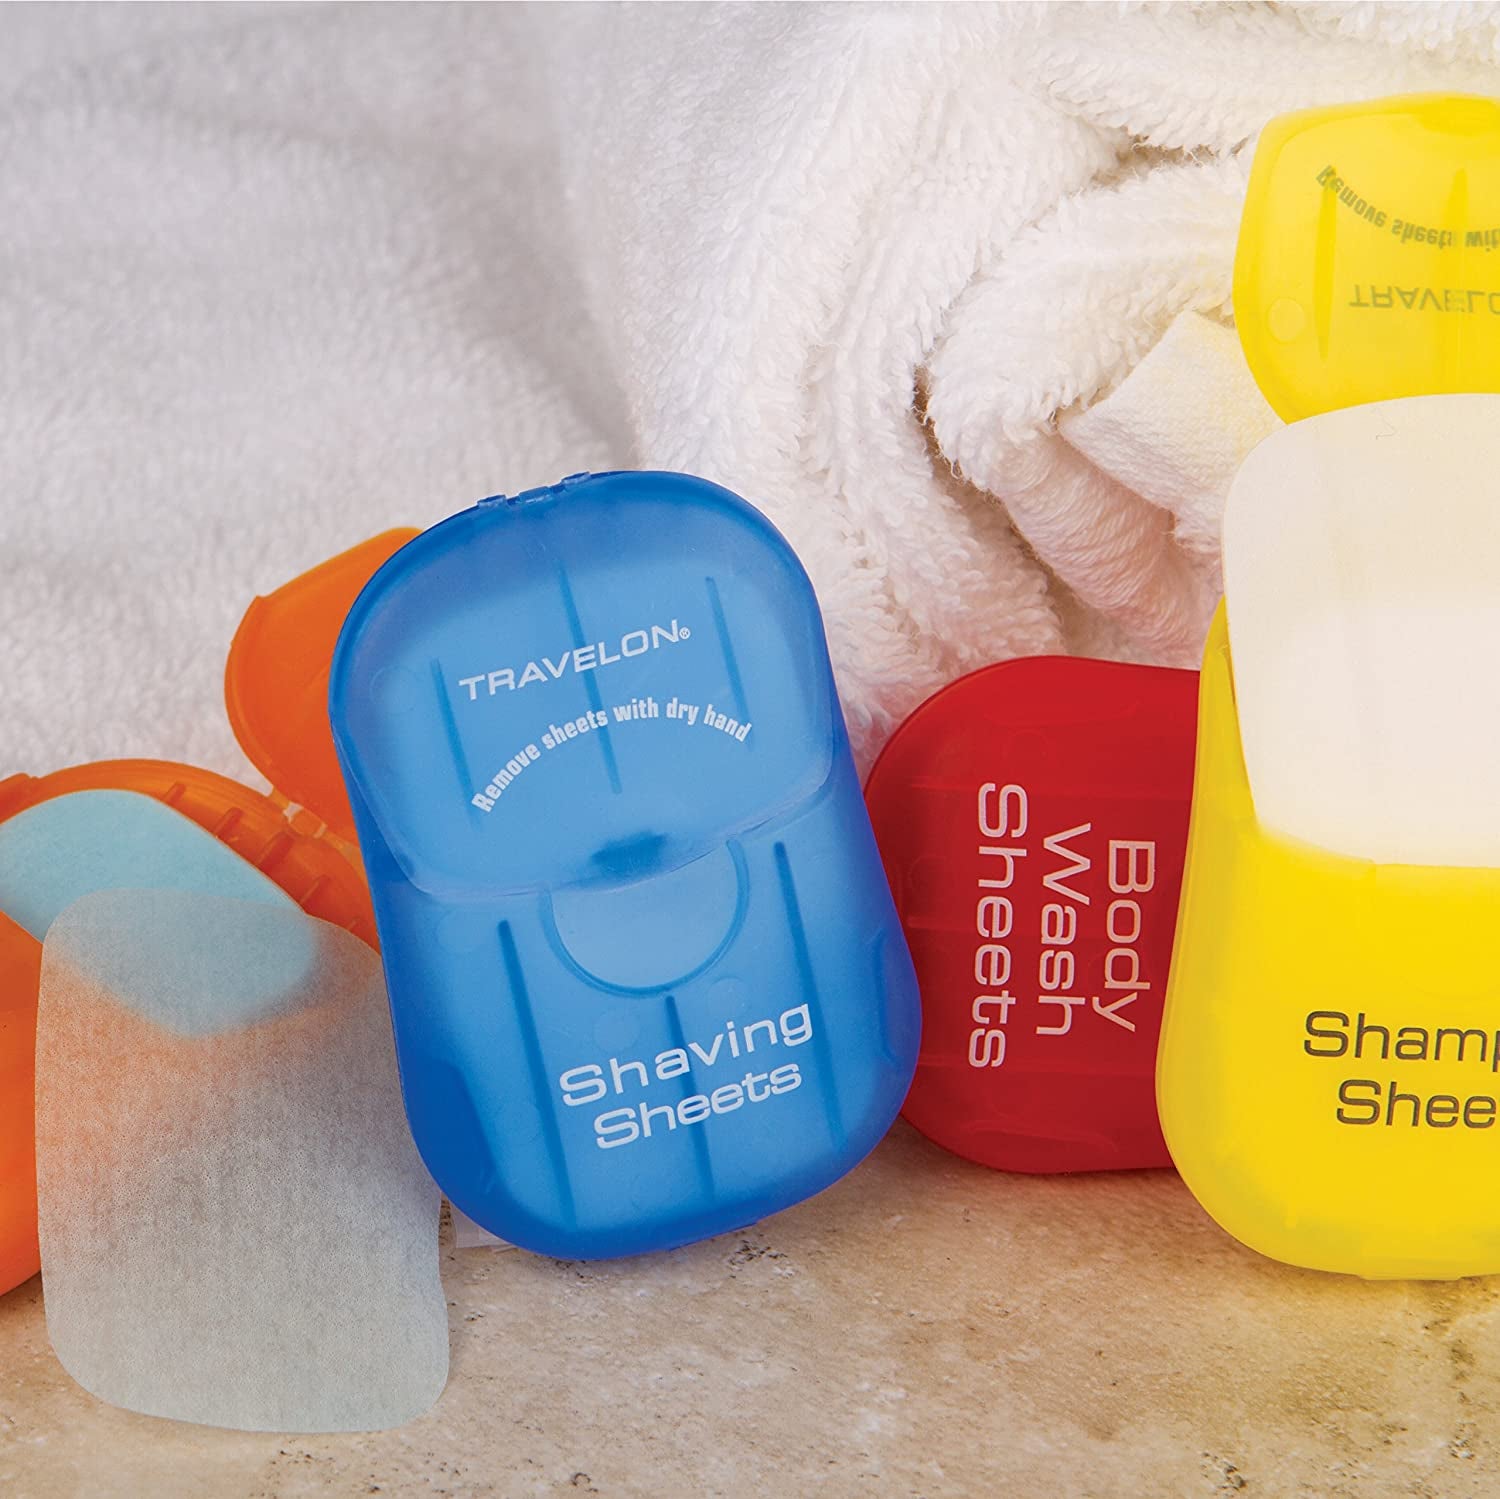 the shaving sheets in colorful packaging